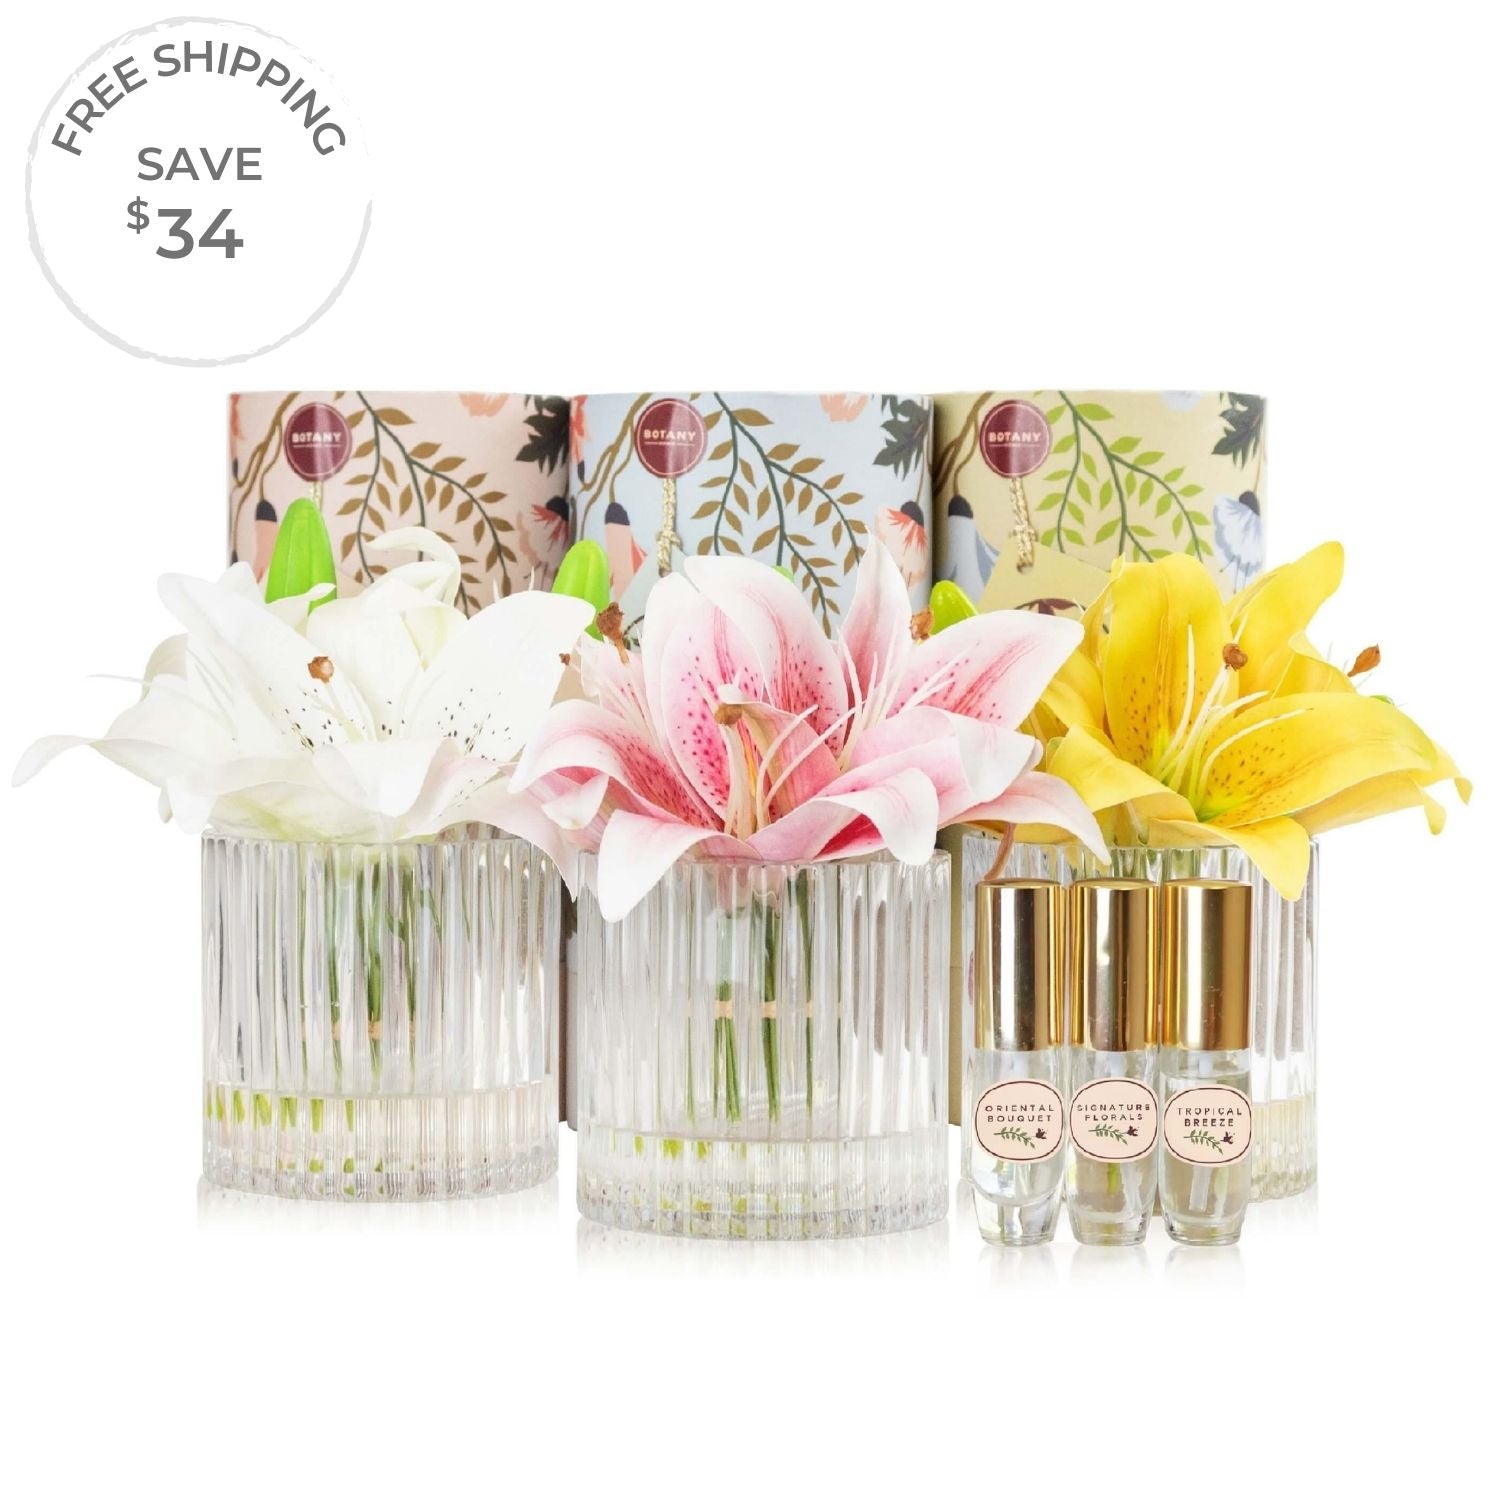 Artificial lily flower arrangements with floral perfume spray